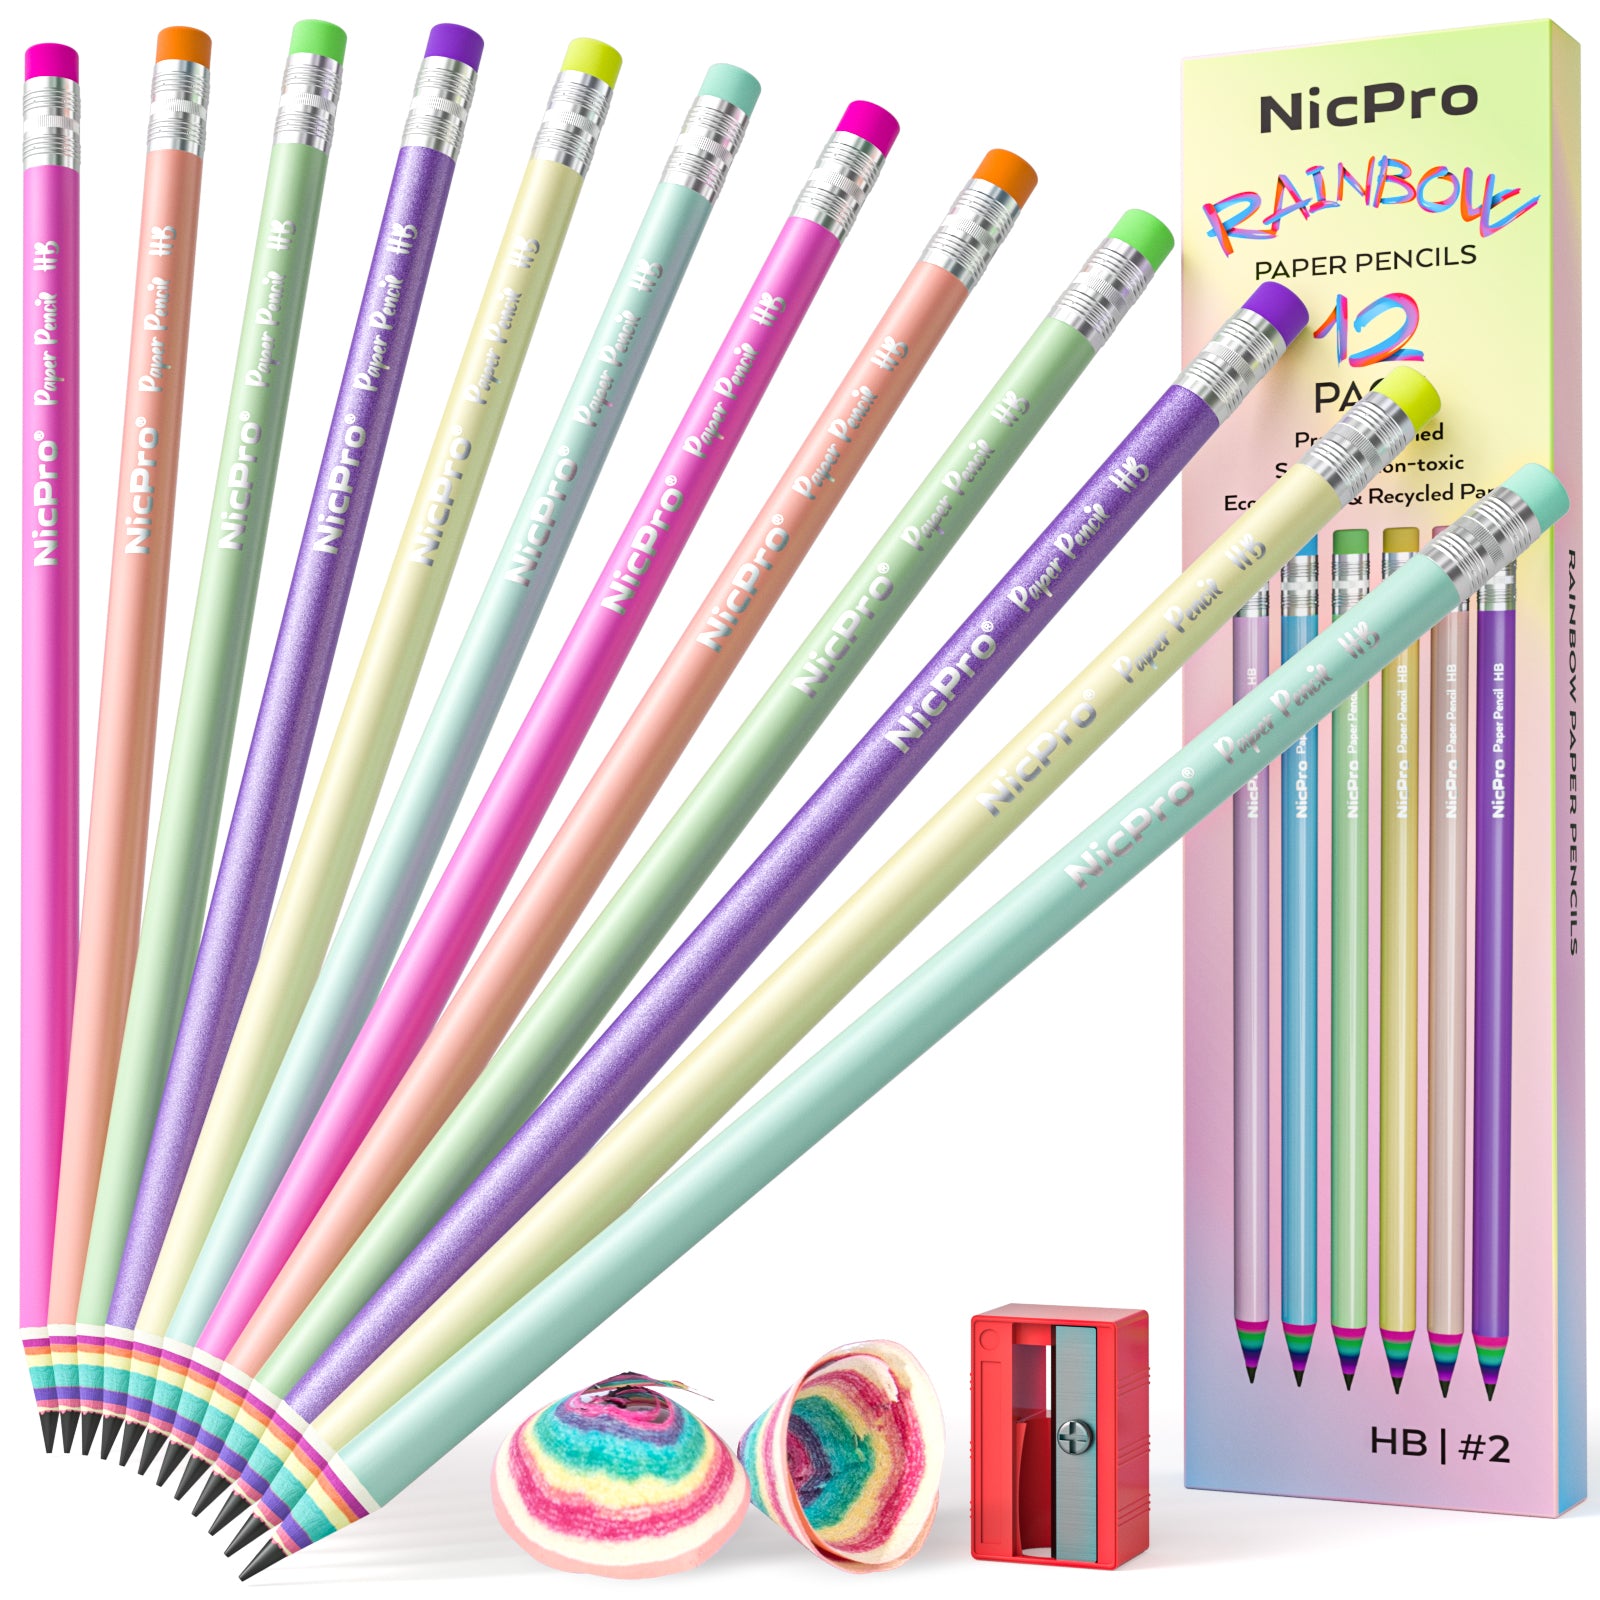 TecUnite 120 Pcs HB Pencils Unsharpened Pencils with Eraser Wooden  Hexagonal Pencils for Kids Adults Gifts Graphite Pencils for Exams School  Office